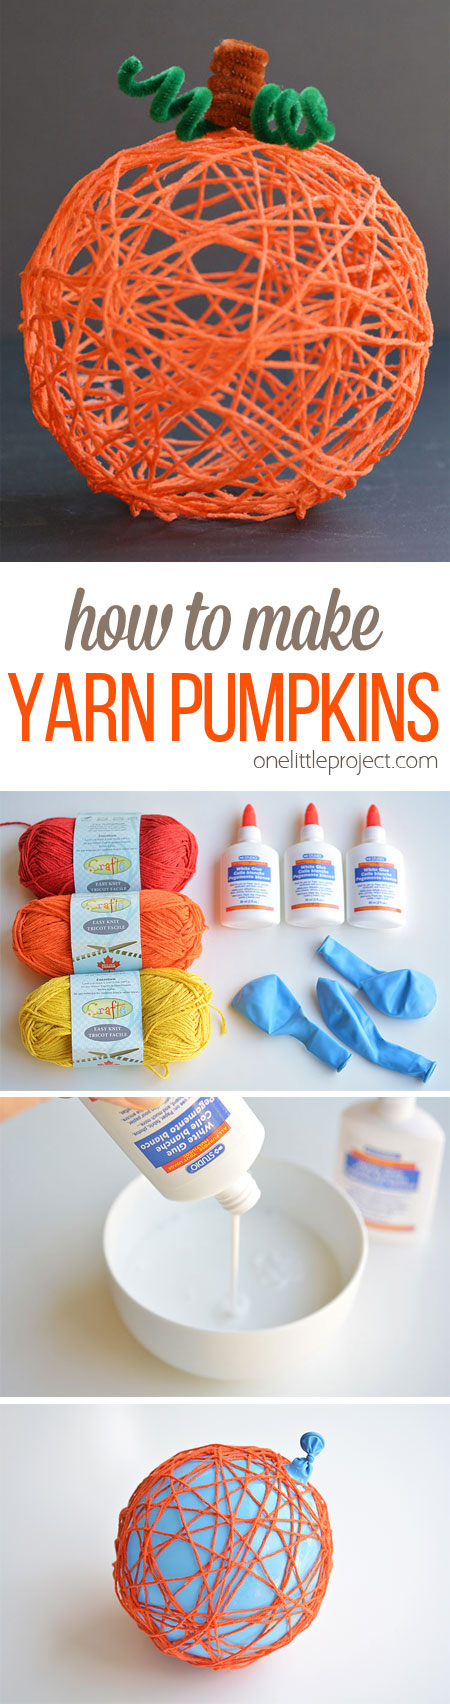 Collage of images for making a yarn pumpkin